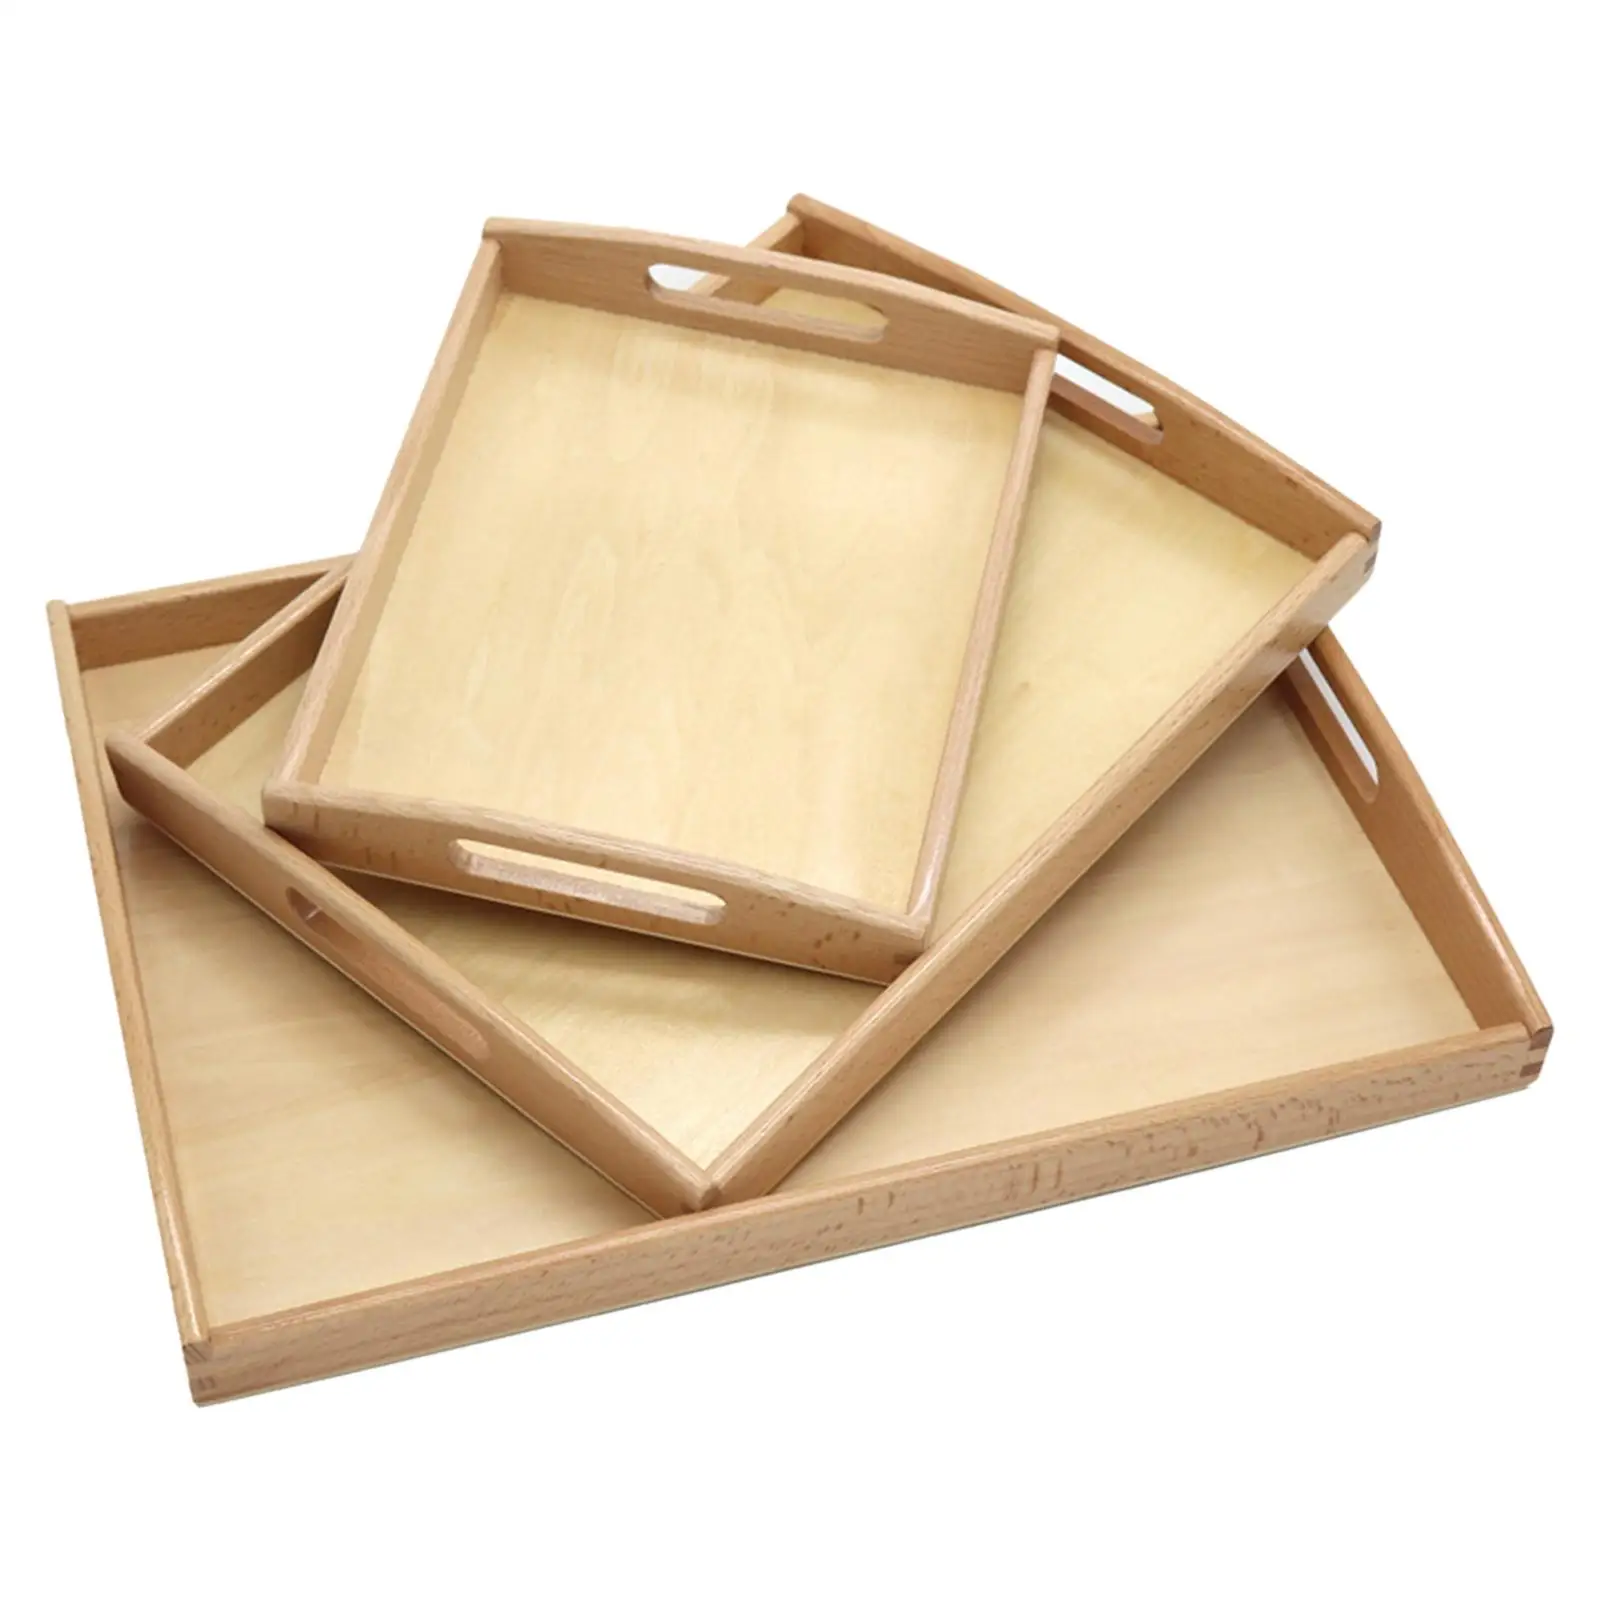 Wood Serving Tray Montessori Wooden Tray for Crafting Montessori Activity Activities